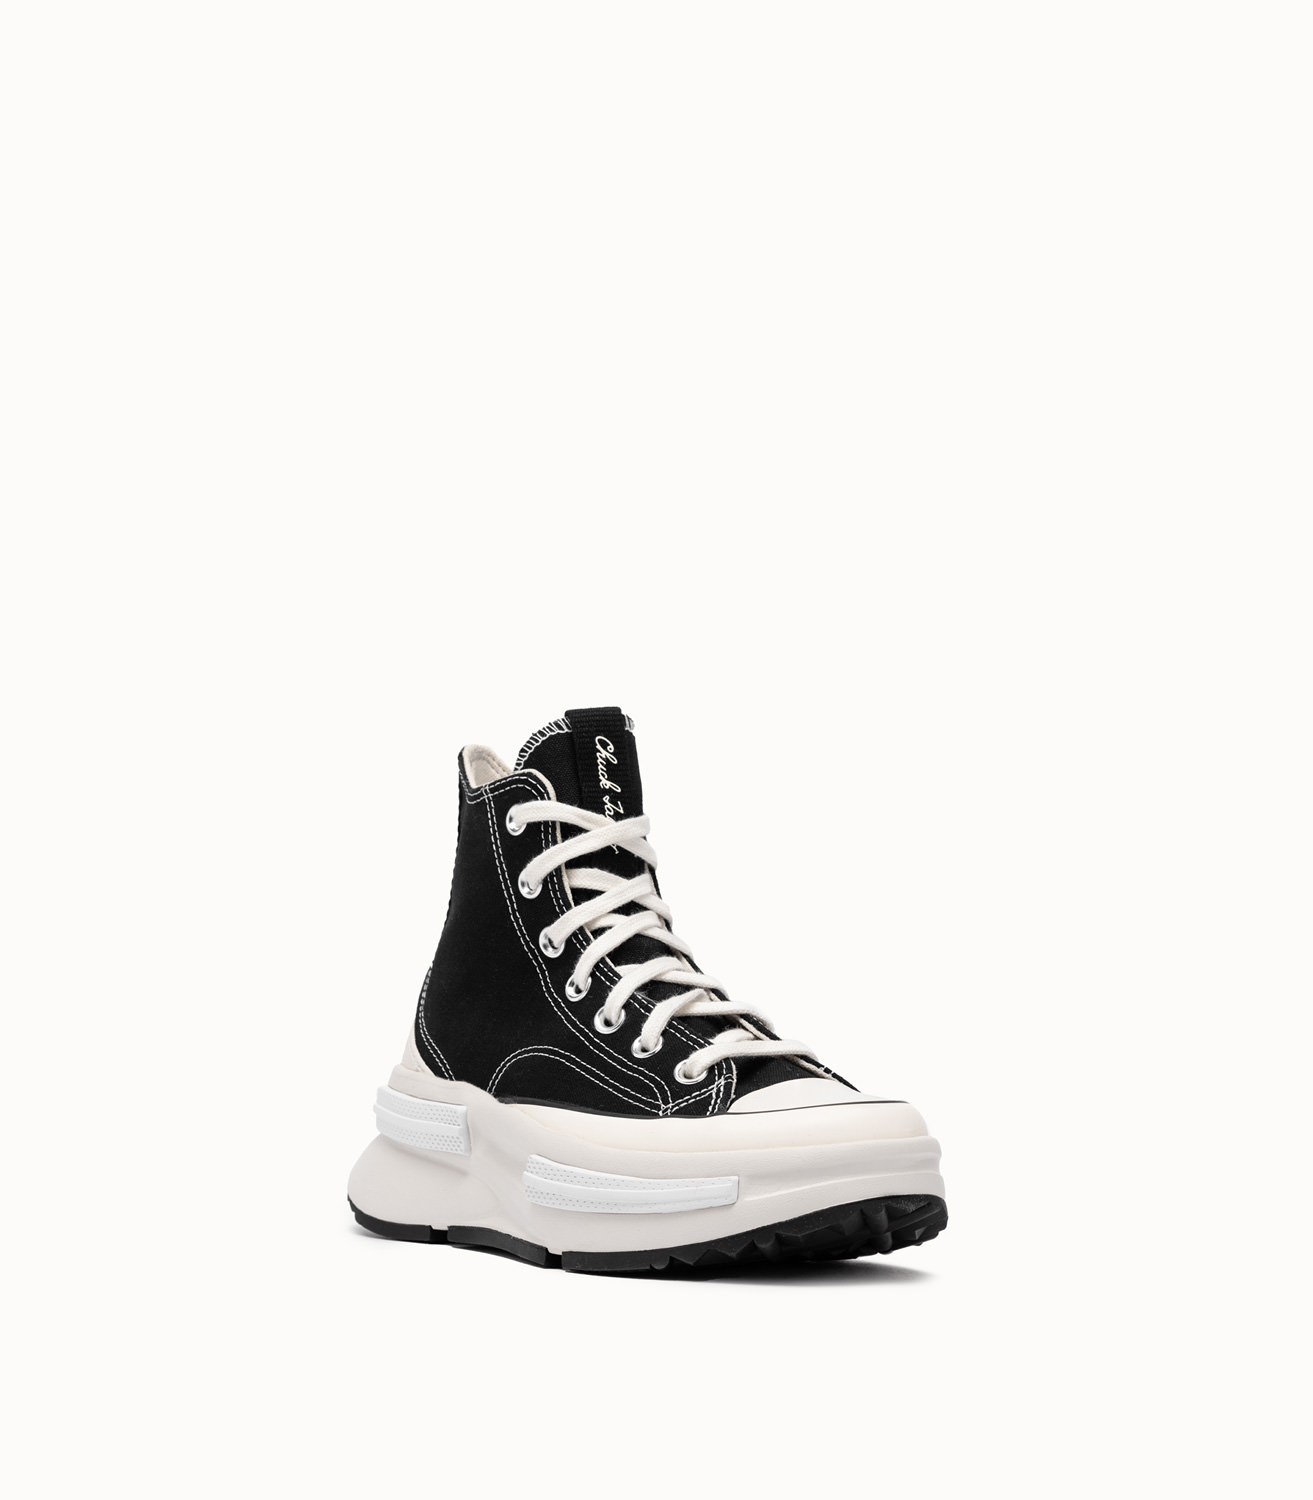 CONVERSE RUN STAR LEGACY SNEAKERS COLOR BLACK | Playground